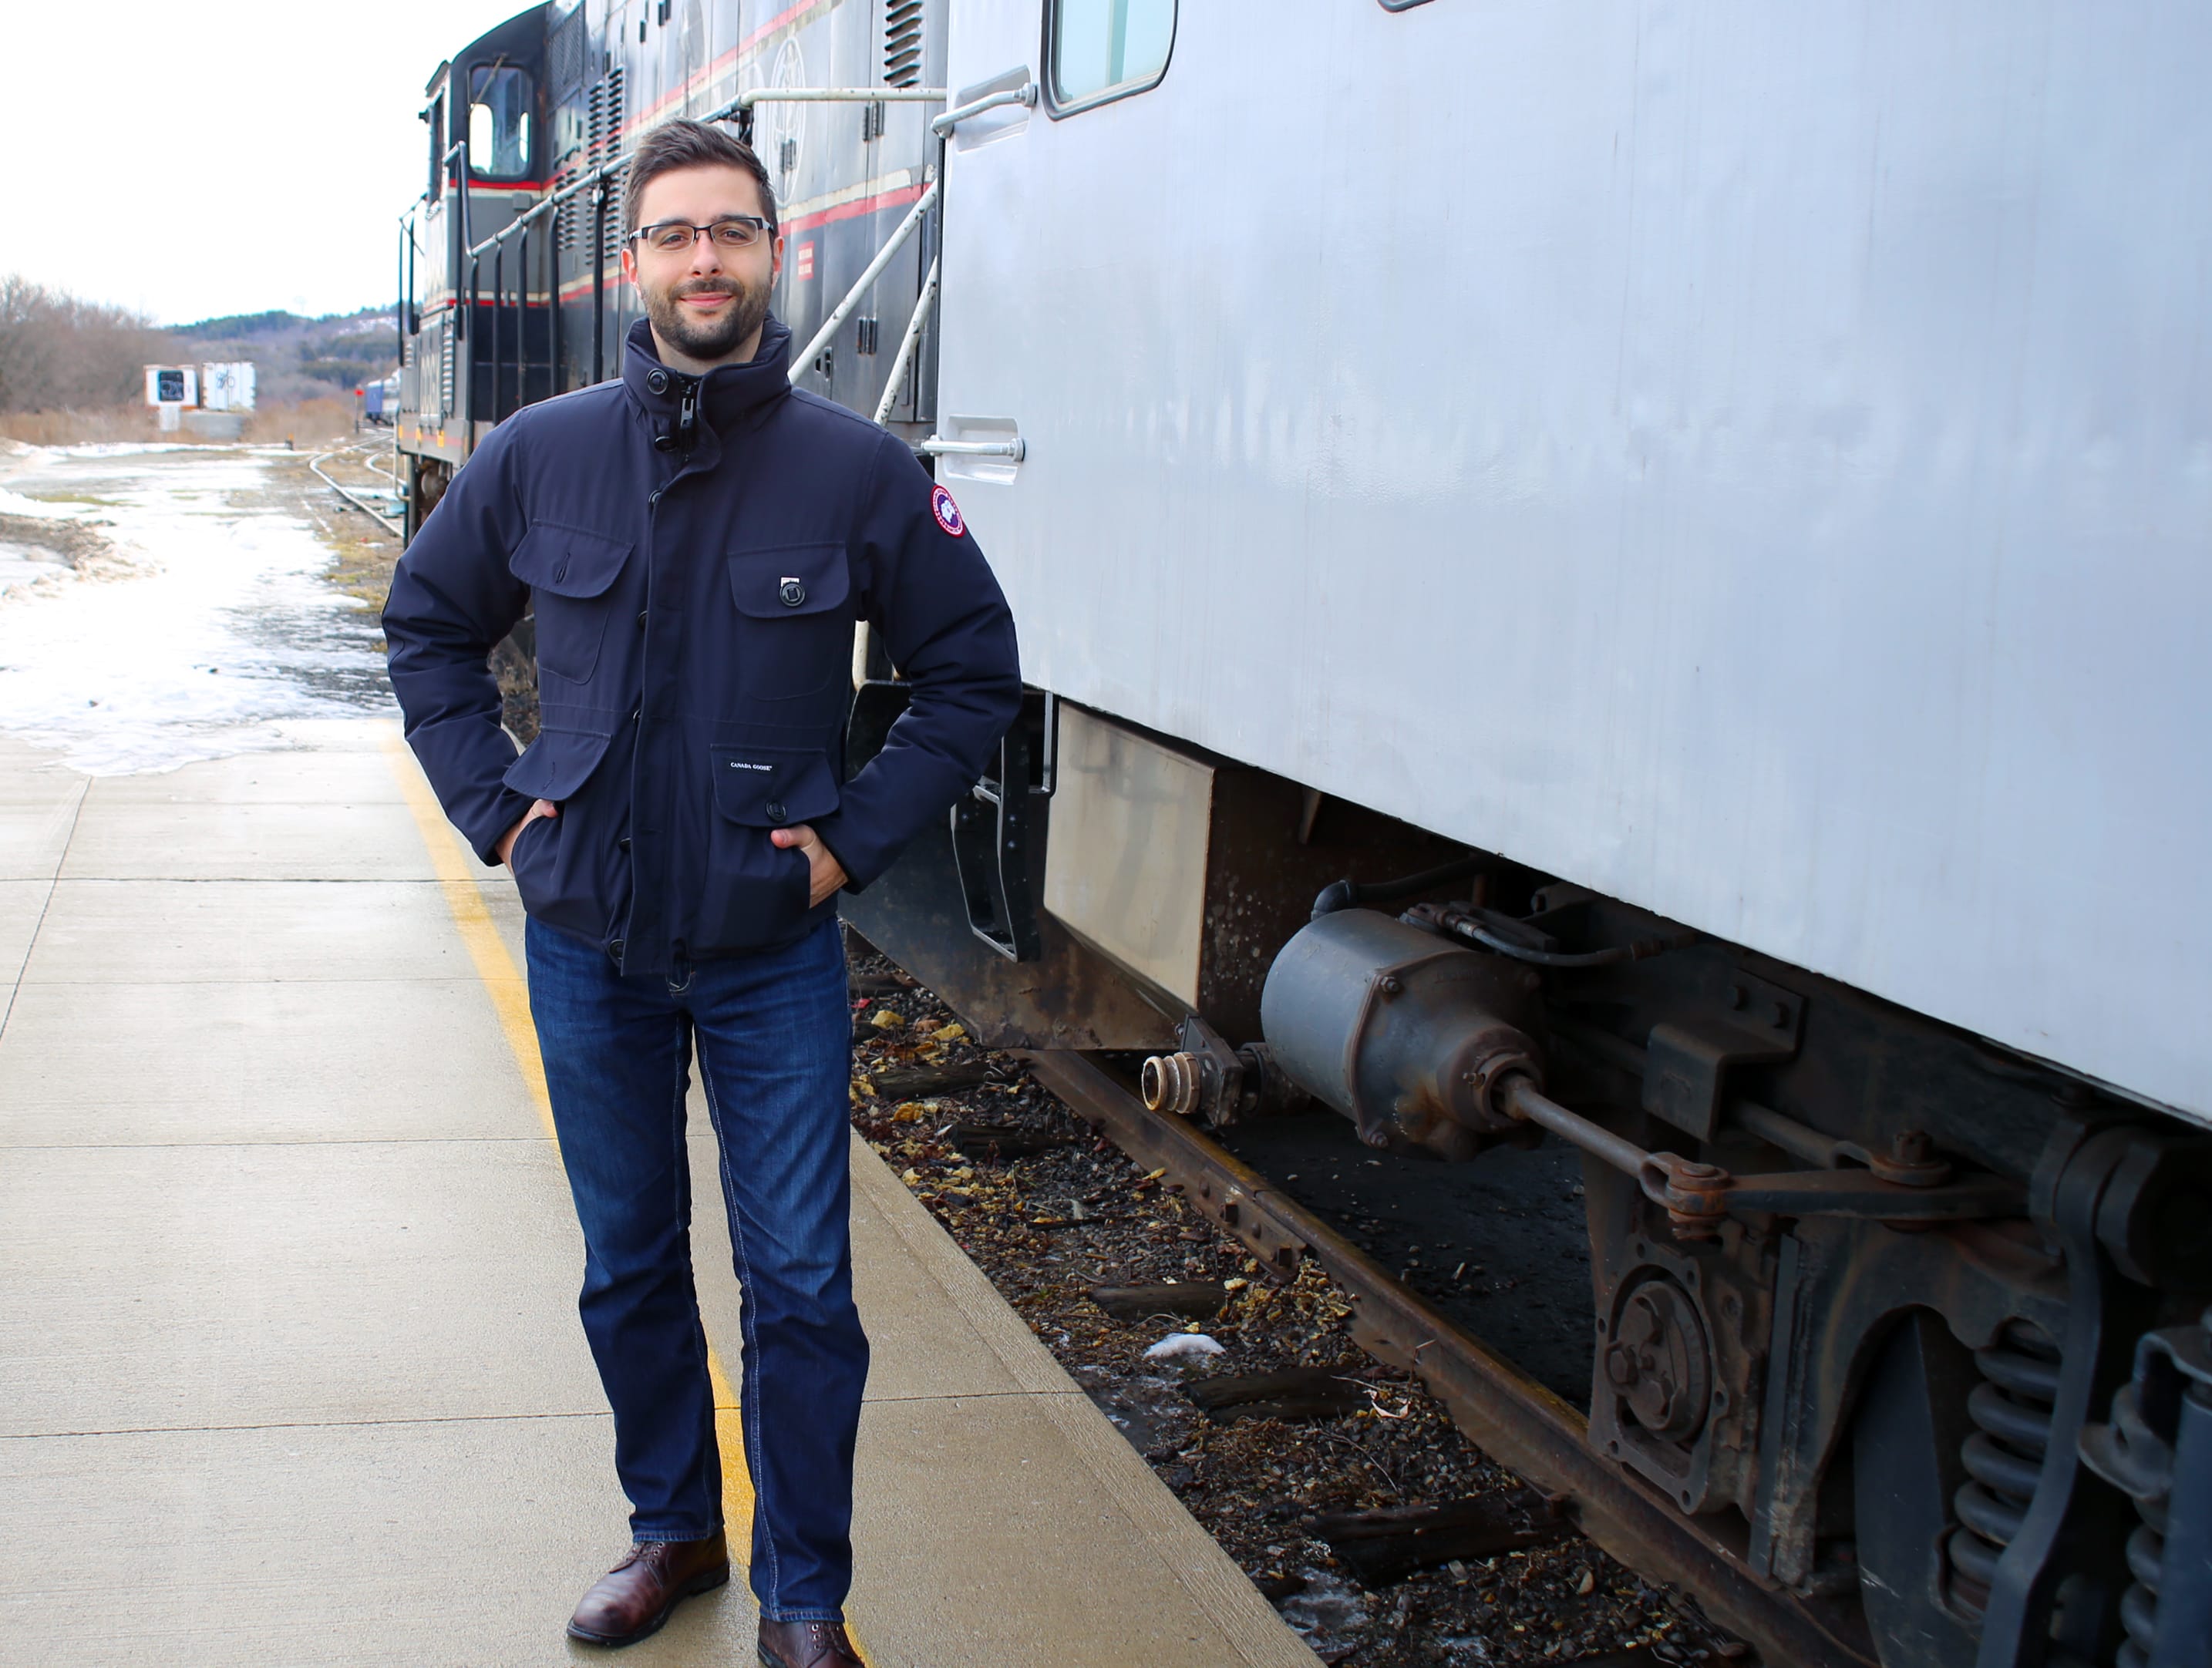 Christopher Balestri poses with a train